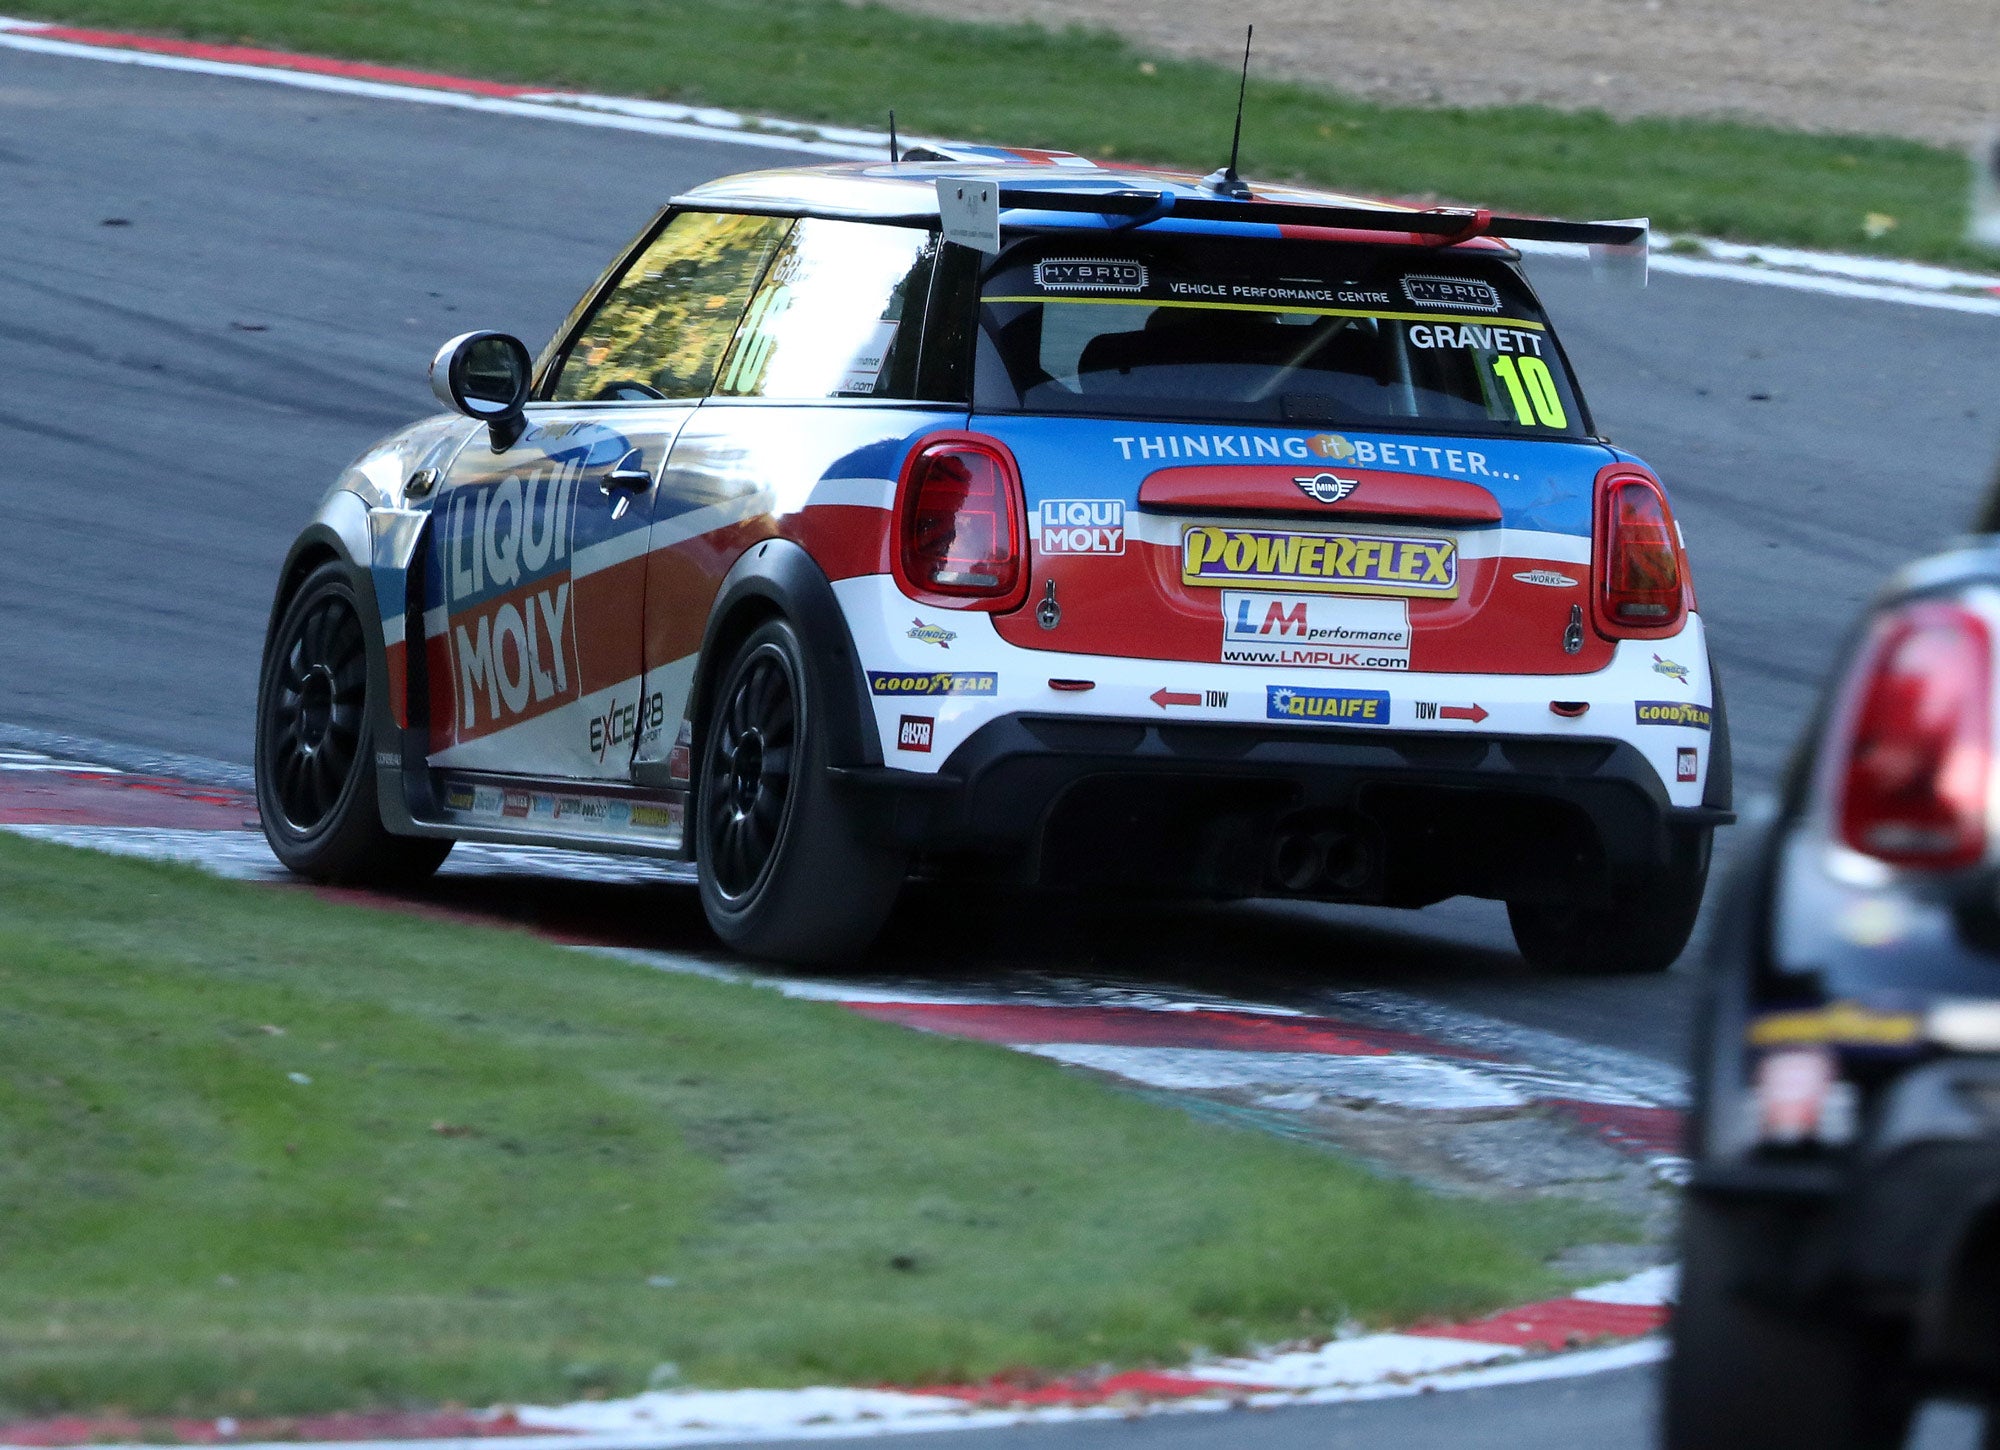 Bradley Gravett son of BTCC British Touring Car Champion Robb Gravett in the MINI Challenge JCW Series Driving at Brands Hatch GP at Stirlings on Curb EXCELR8 Motorsport LIQUI MOLY LM Performance Thinking it Better Scalextric DriverAssist.me